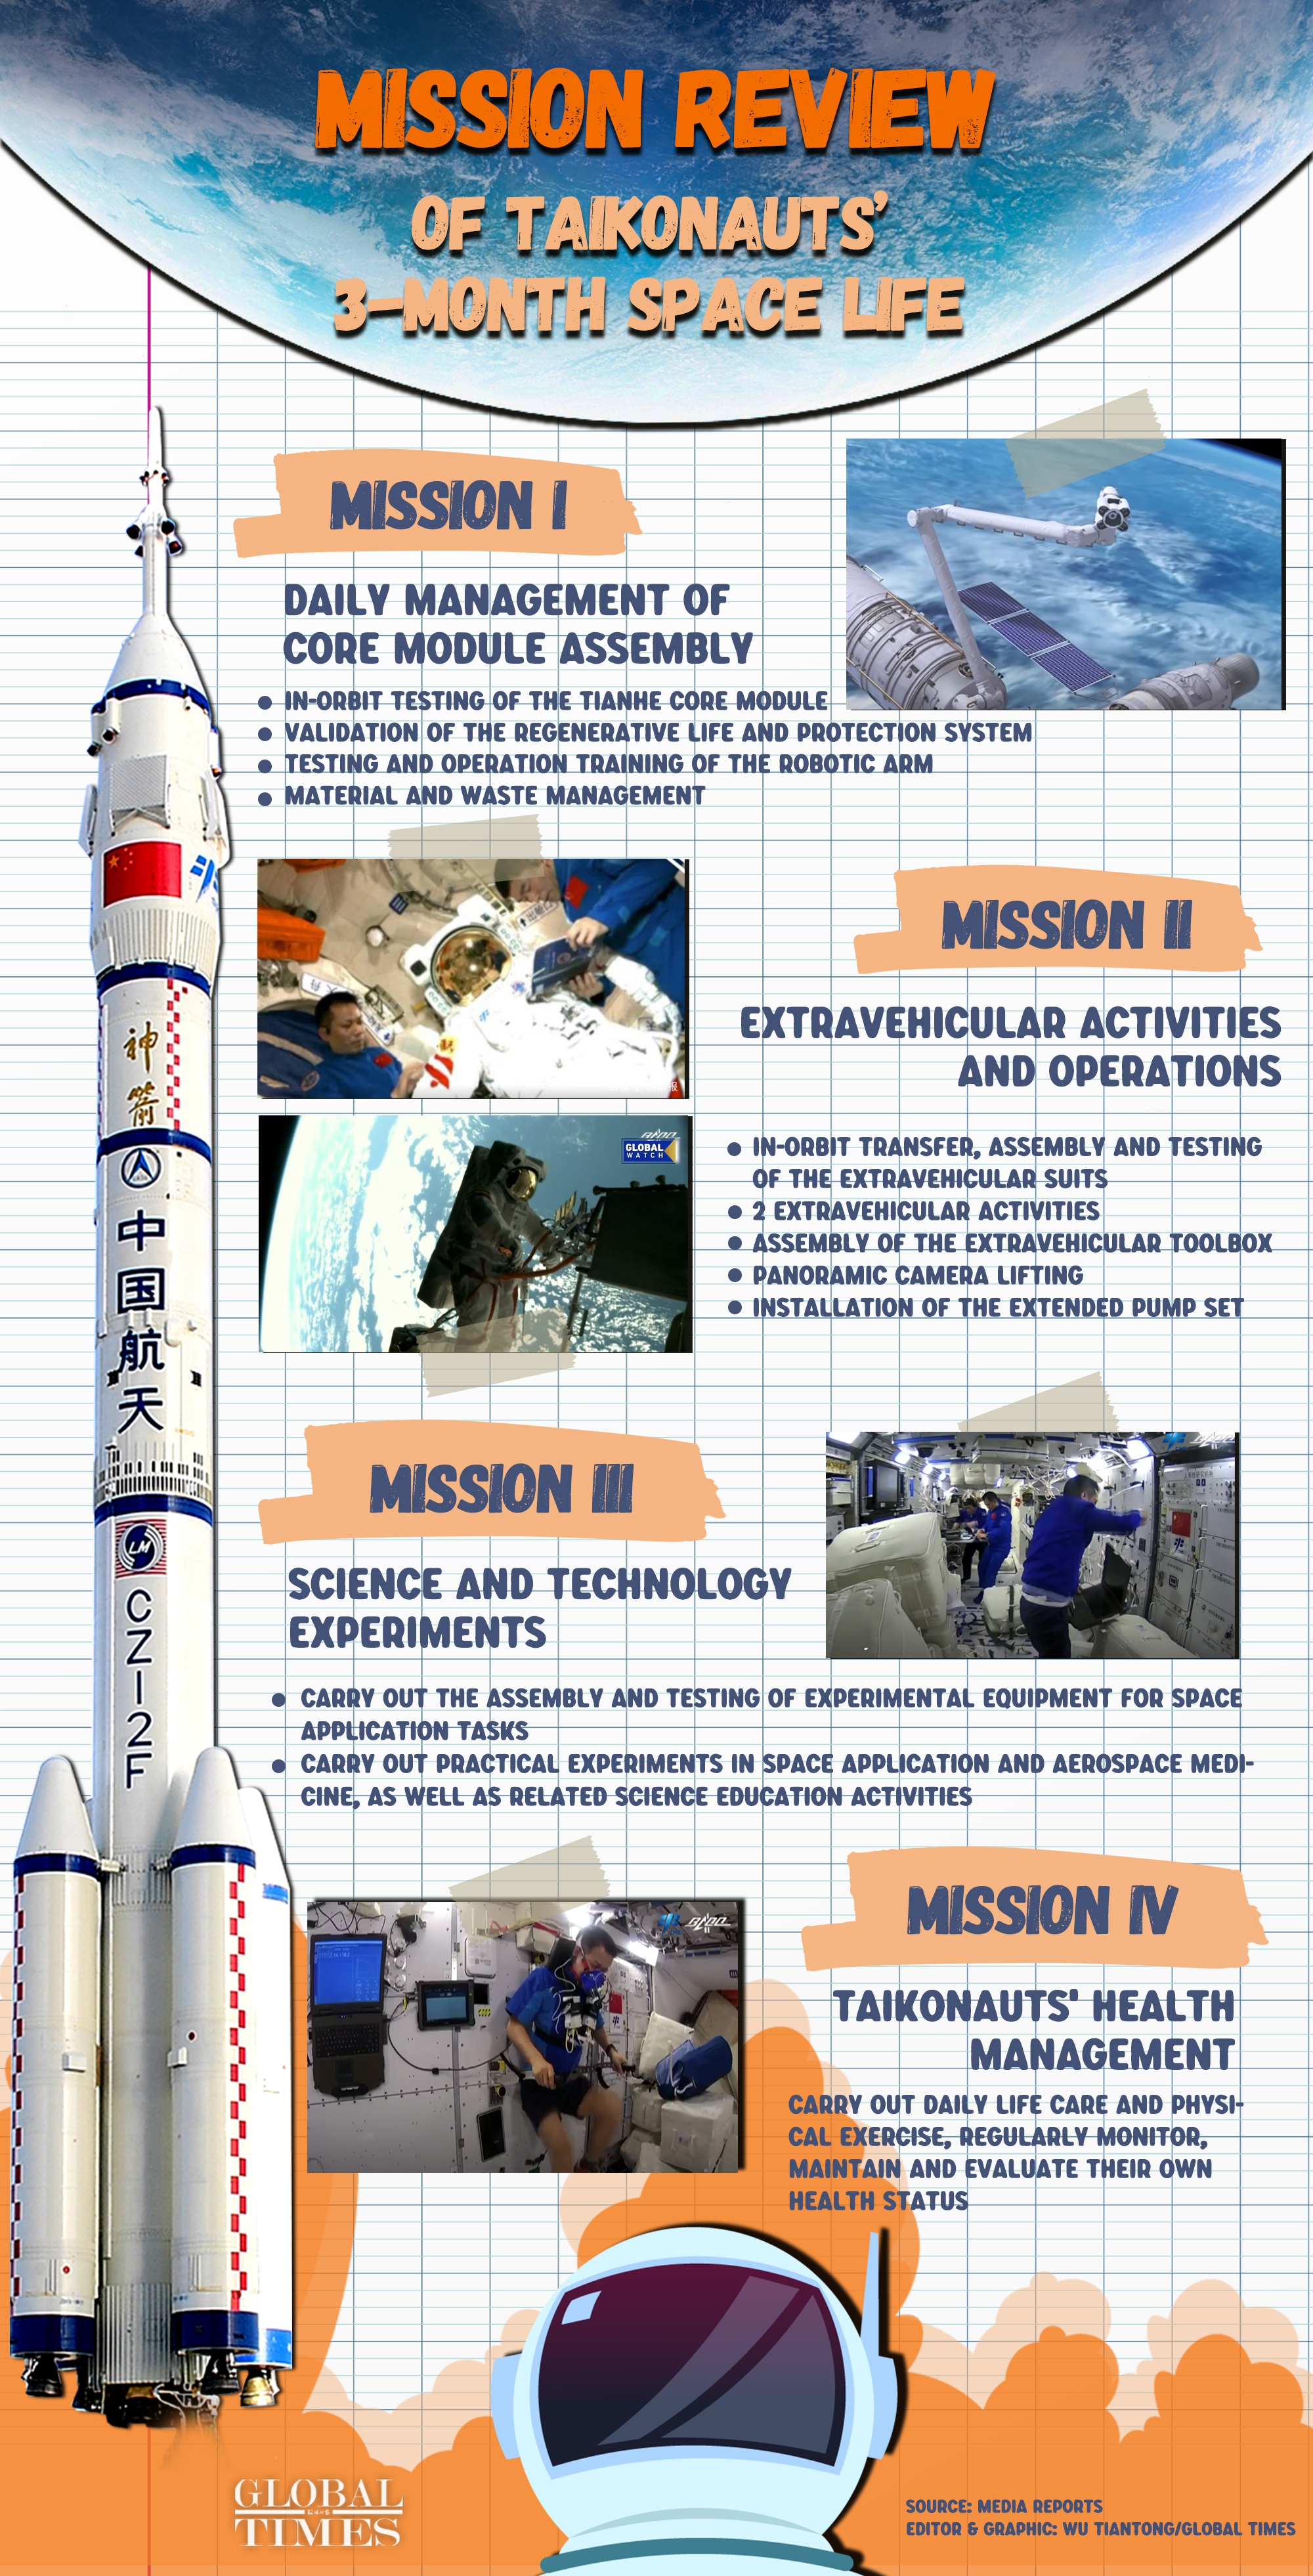 Mission review of Taikonauts' 3-month space life Graphic: Wu Tiantong/GT